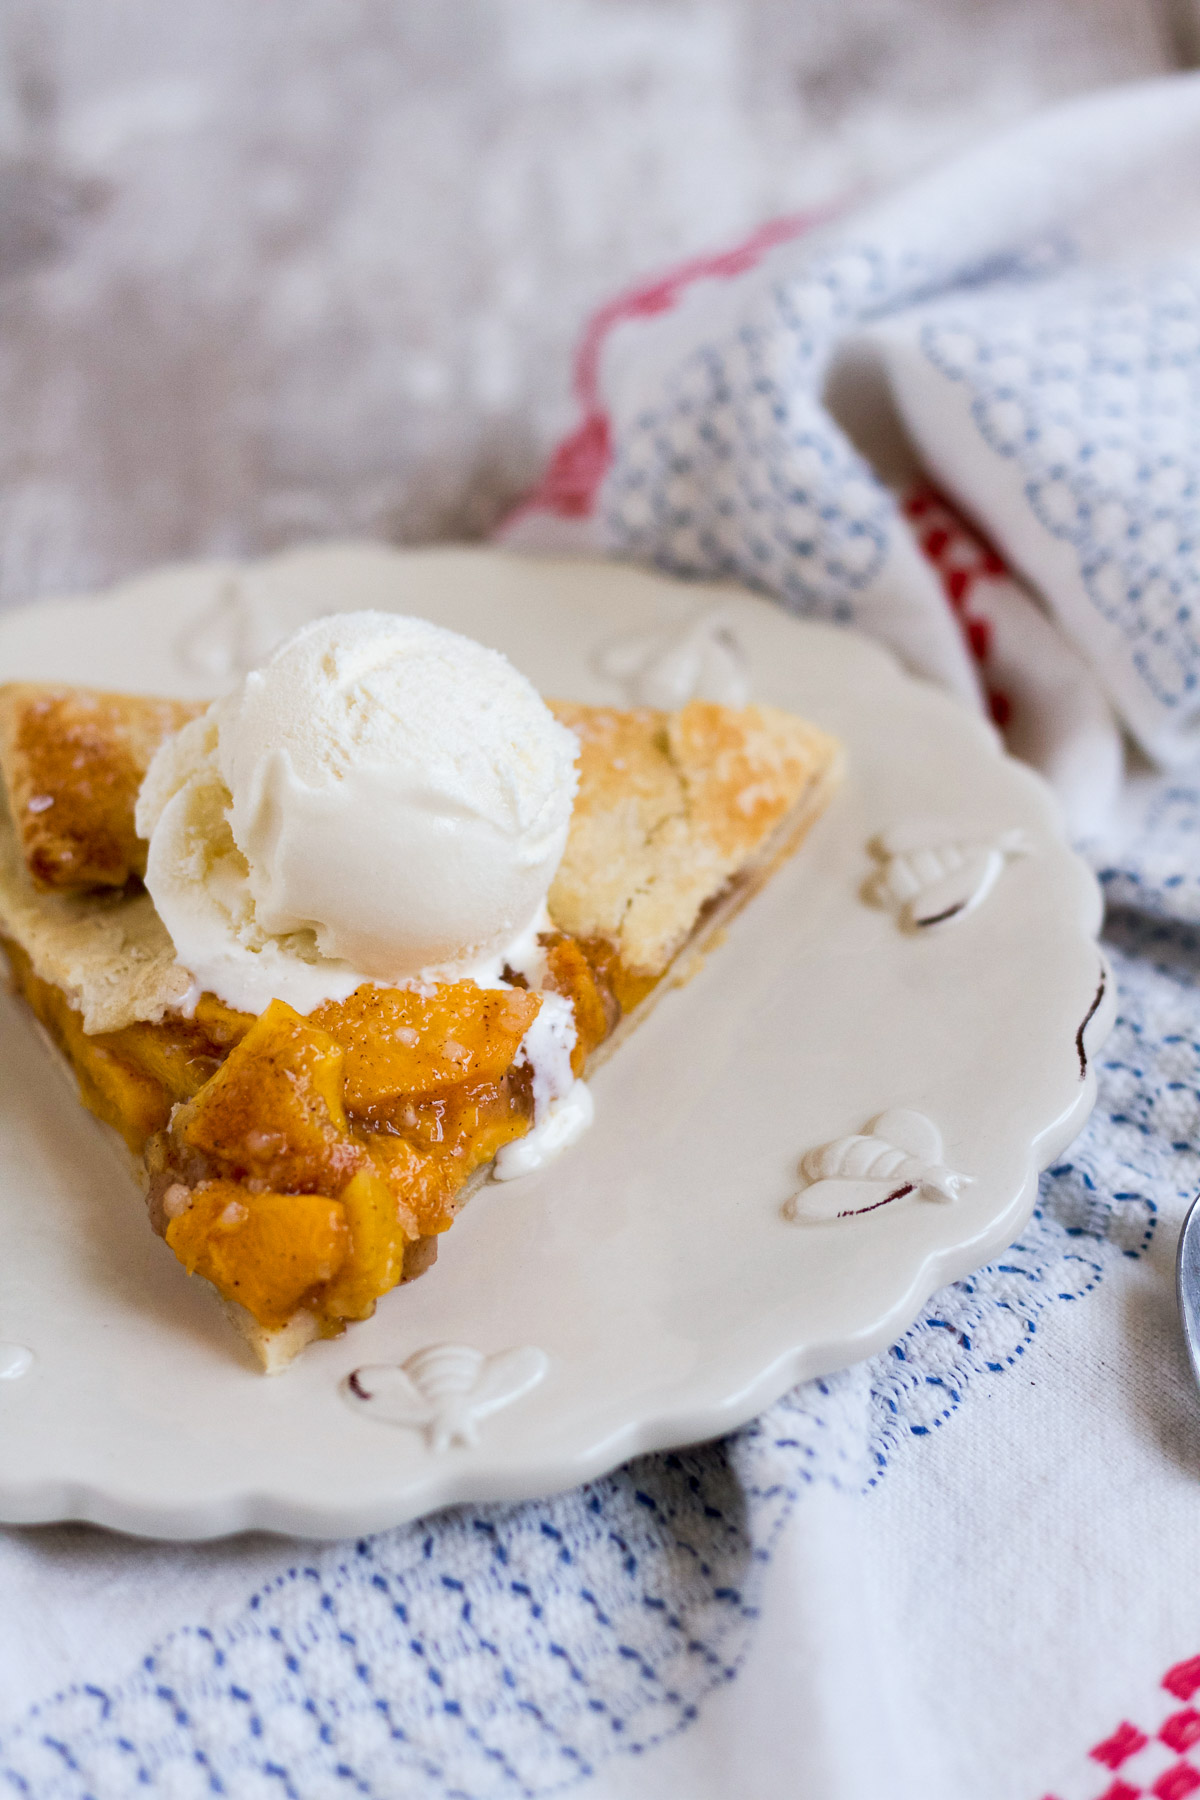 Make this sweetly spiced fresh peach galette, and enjoy one last bite of summer!